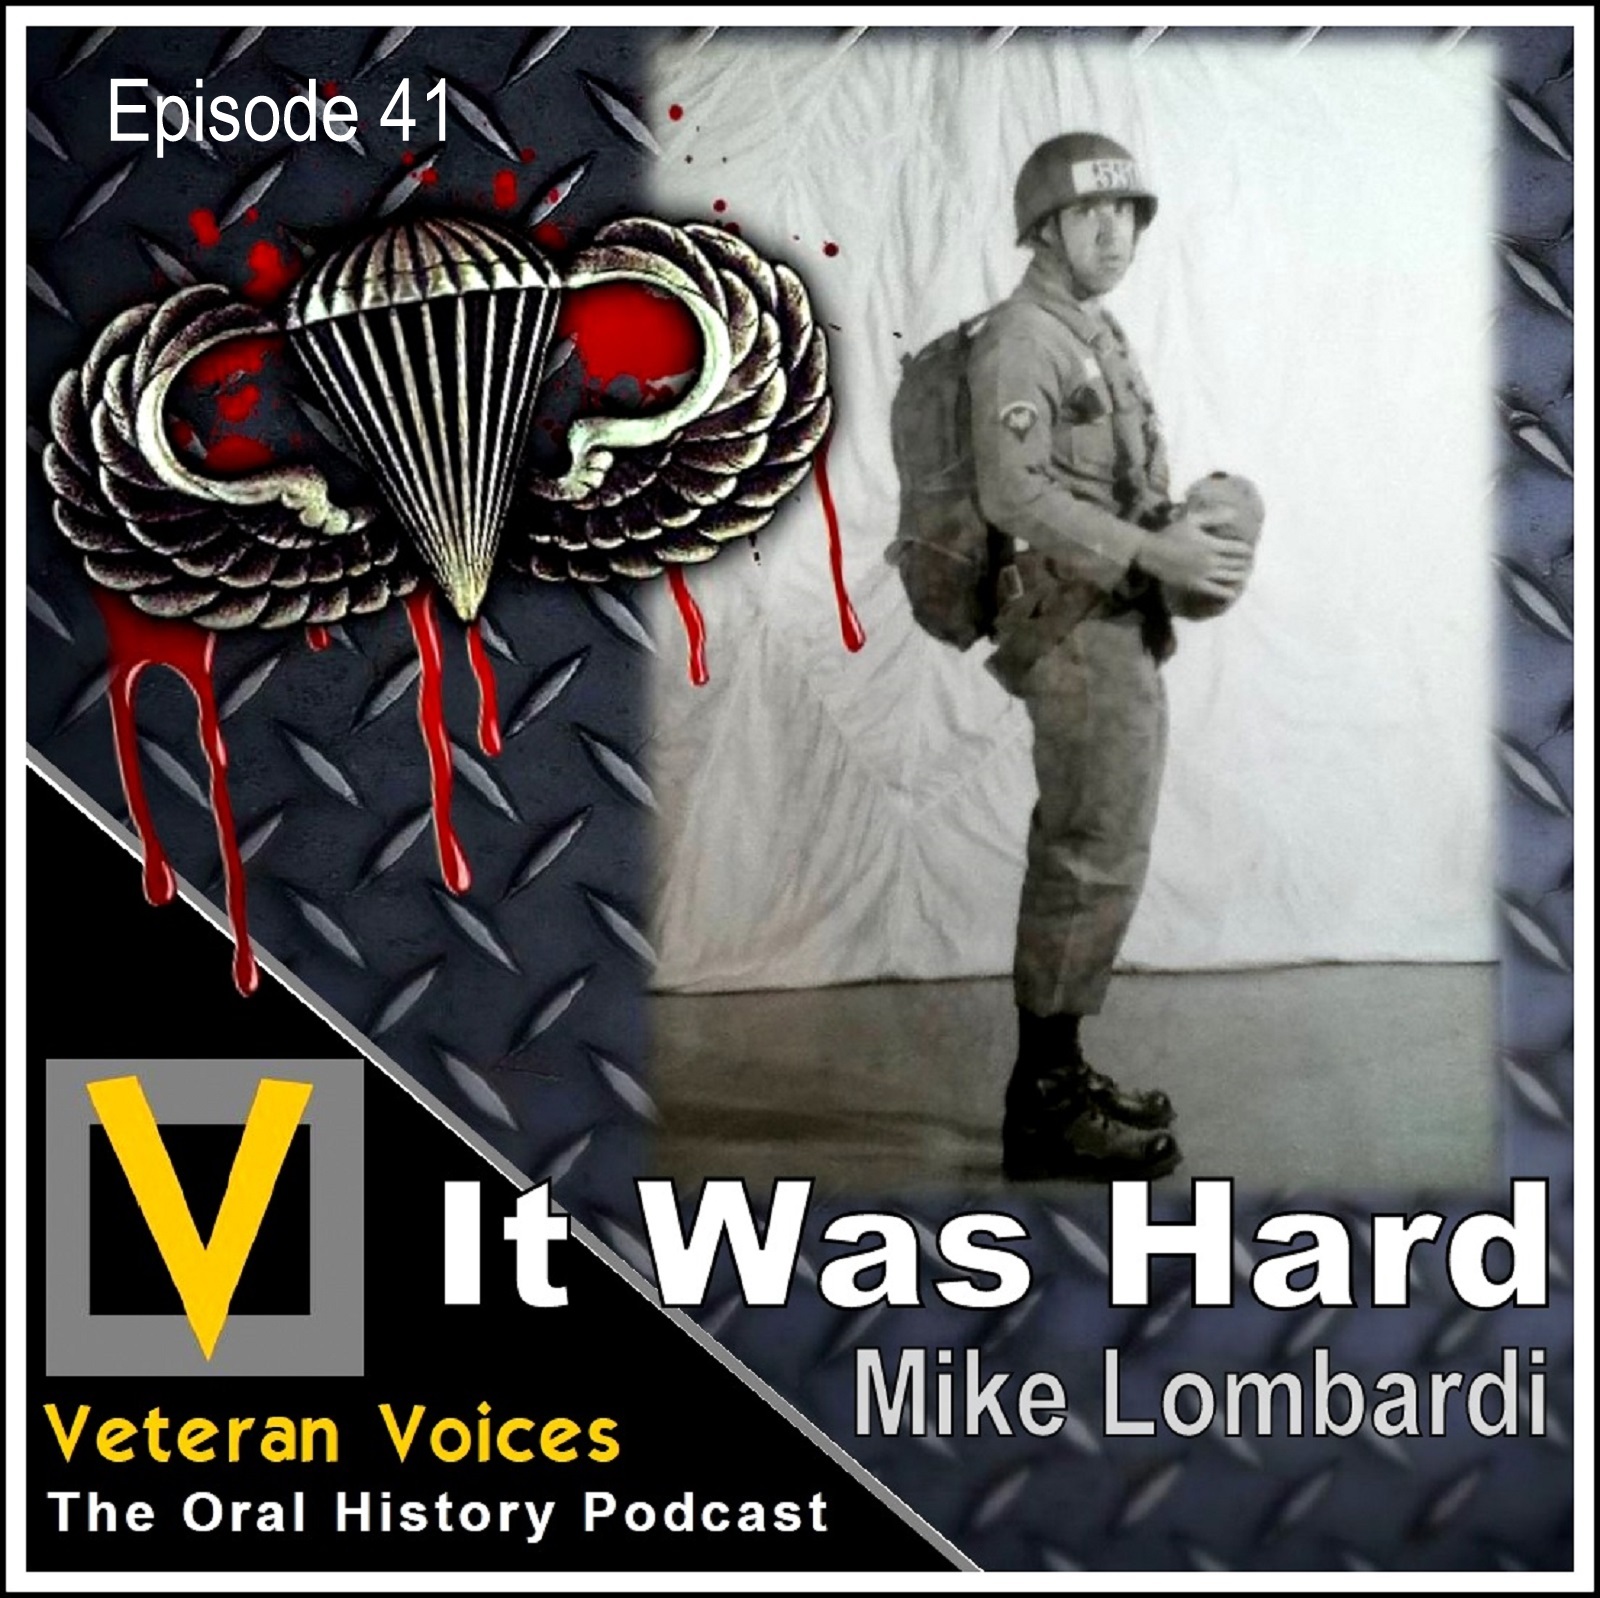 Veteran Voices Podcast Ep Mike Lombardi The Social Voice Project